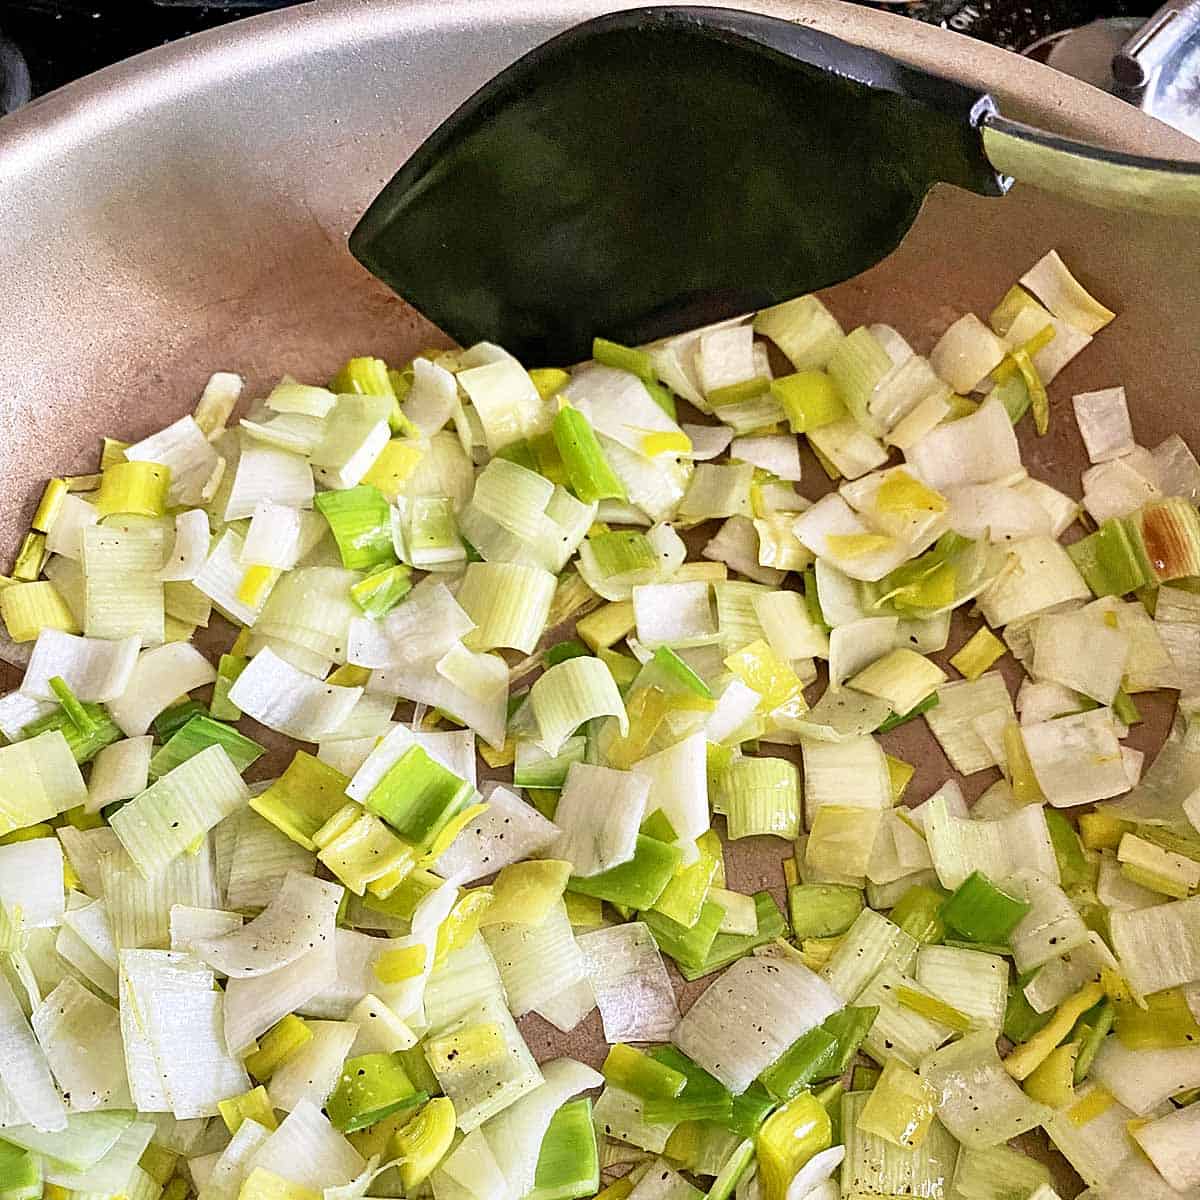 Chopped leeks cooking in a skillet with a black spoon stirring them.